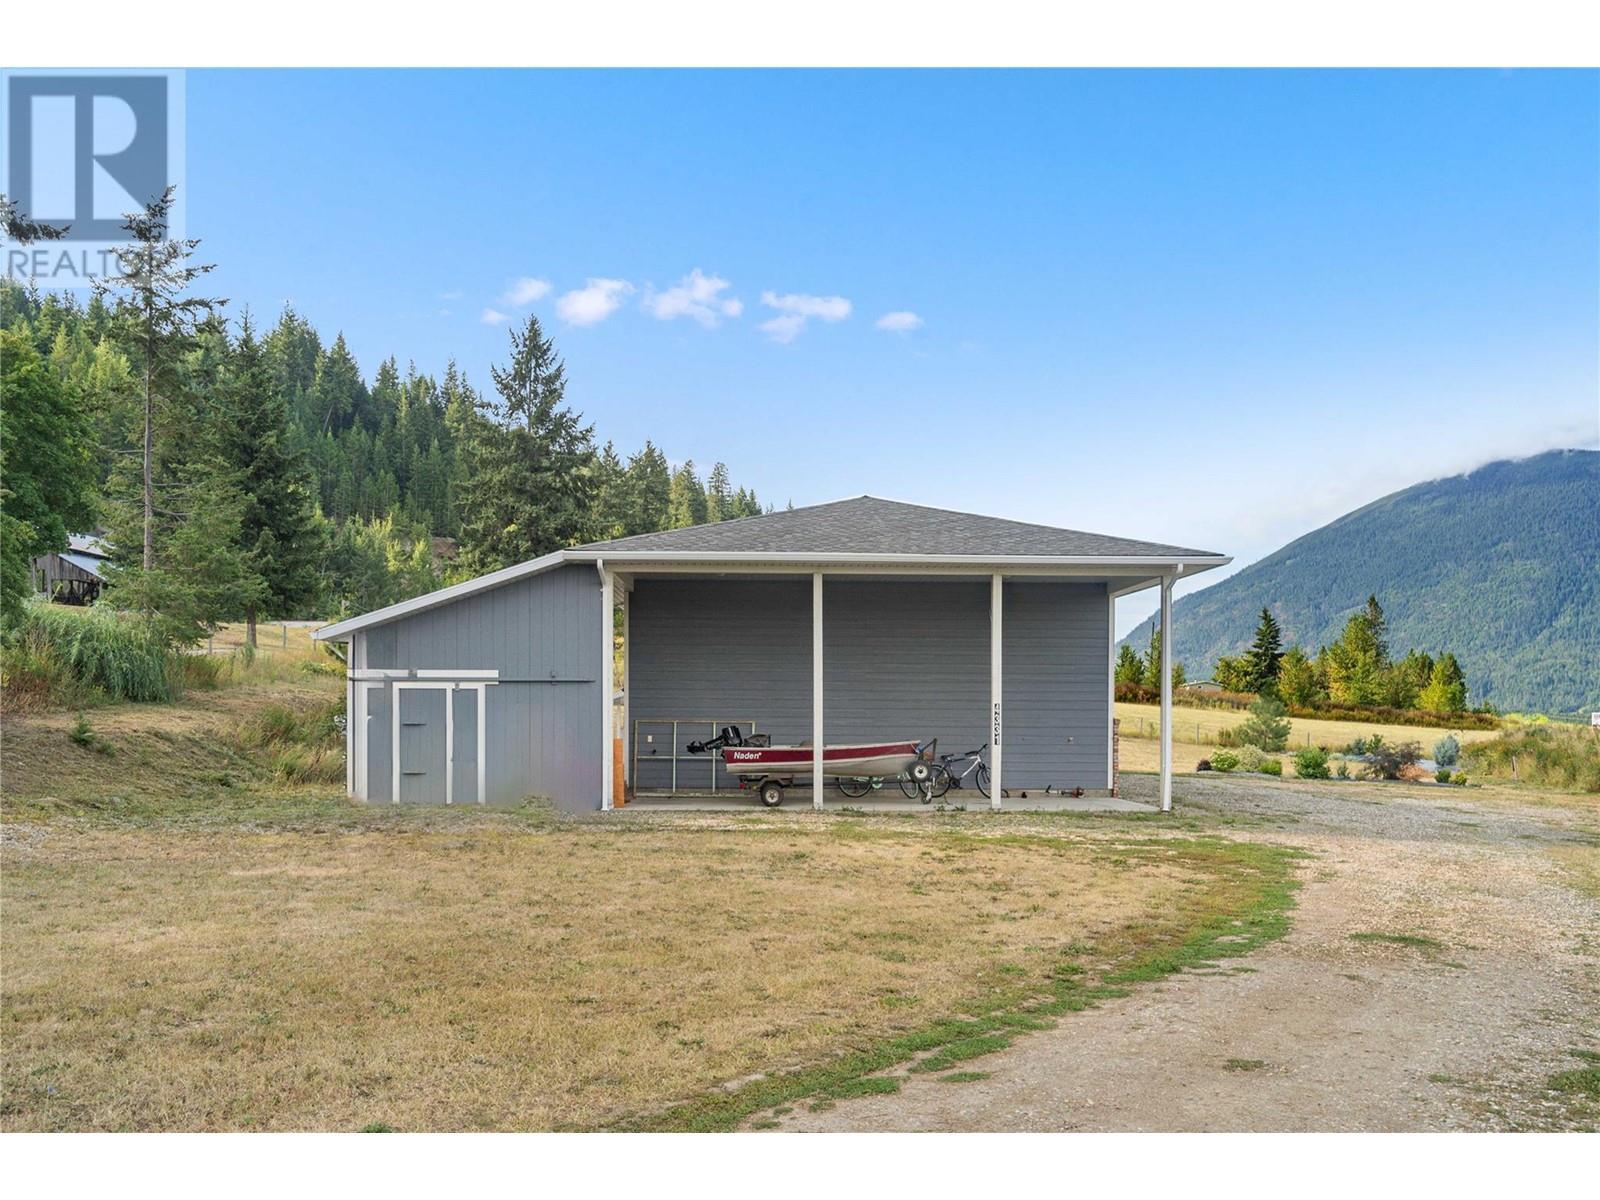  4331 Trans Canada Highway, Tappen